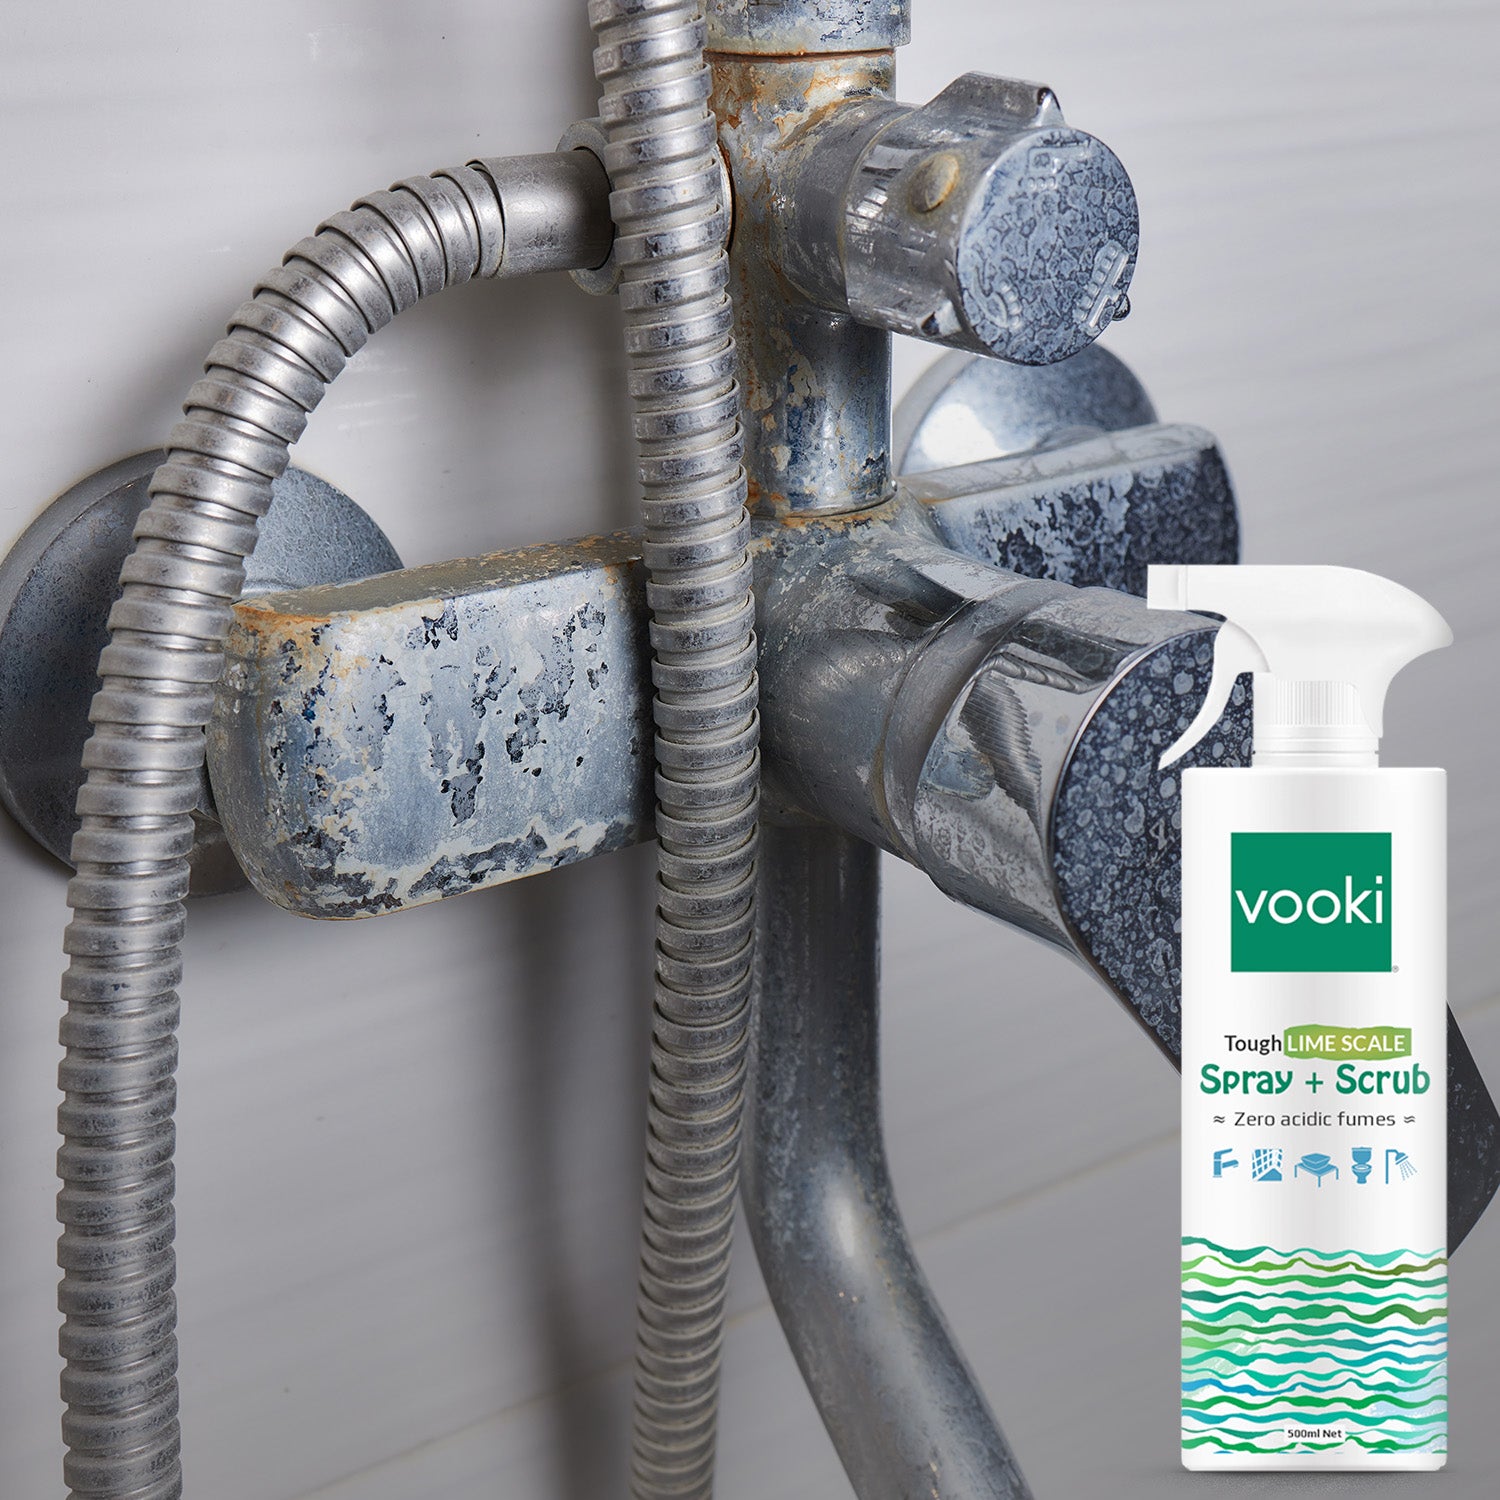 An image of vooki limescale spray+scrub bottle and on the background a shower hose attached 